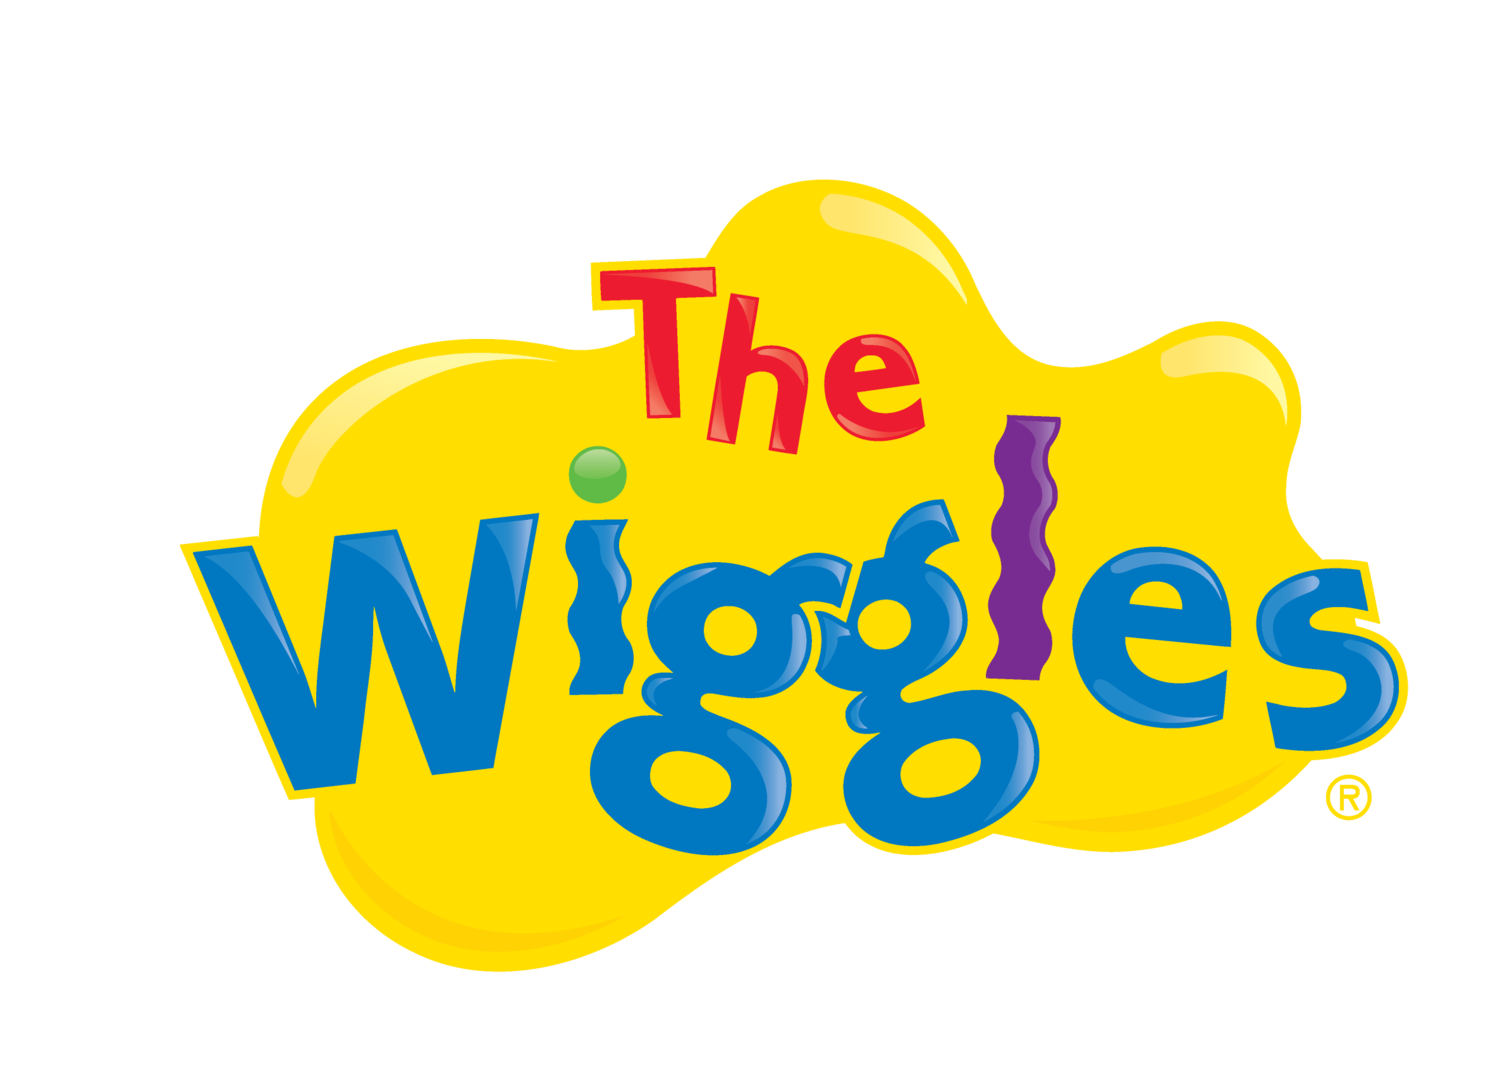 The Wiggles: Fun-filled Music & Entertainment for Kids